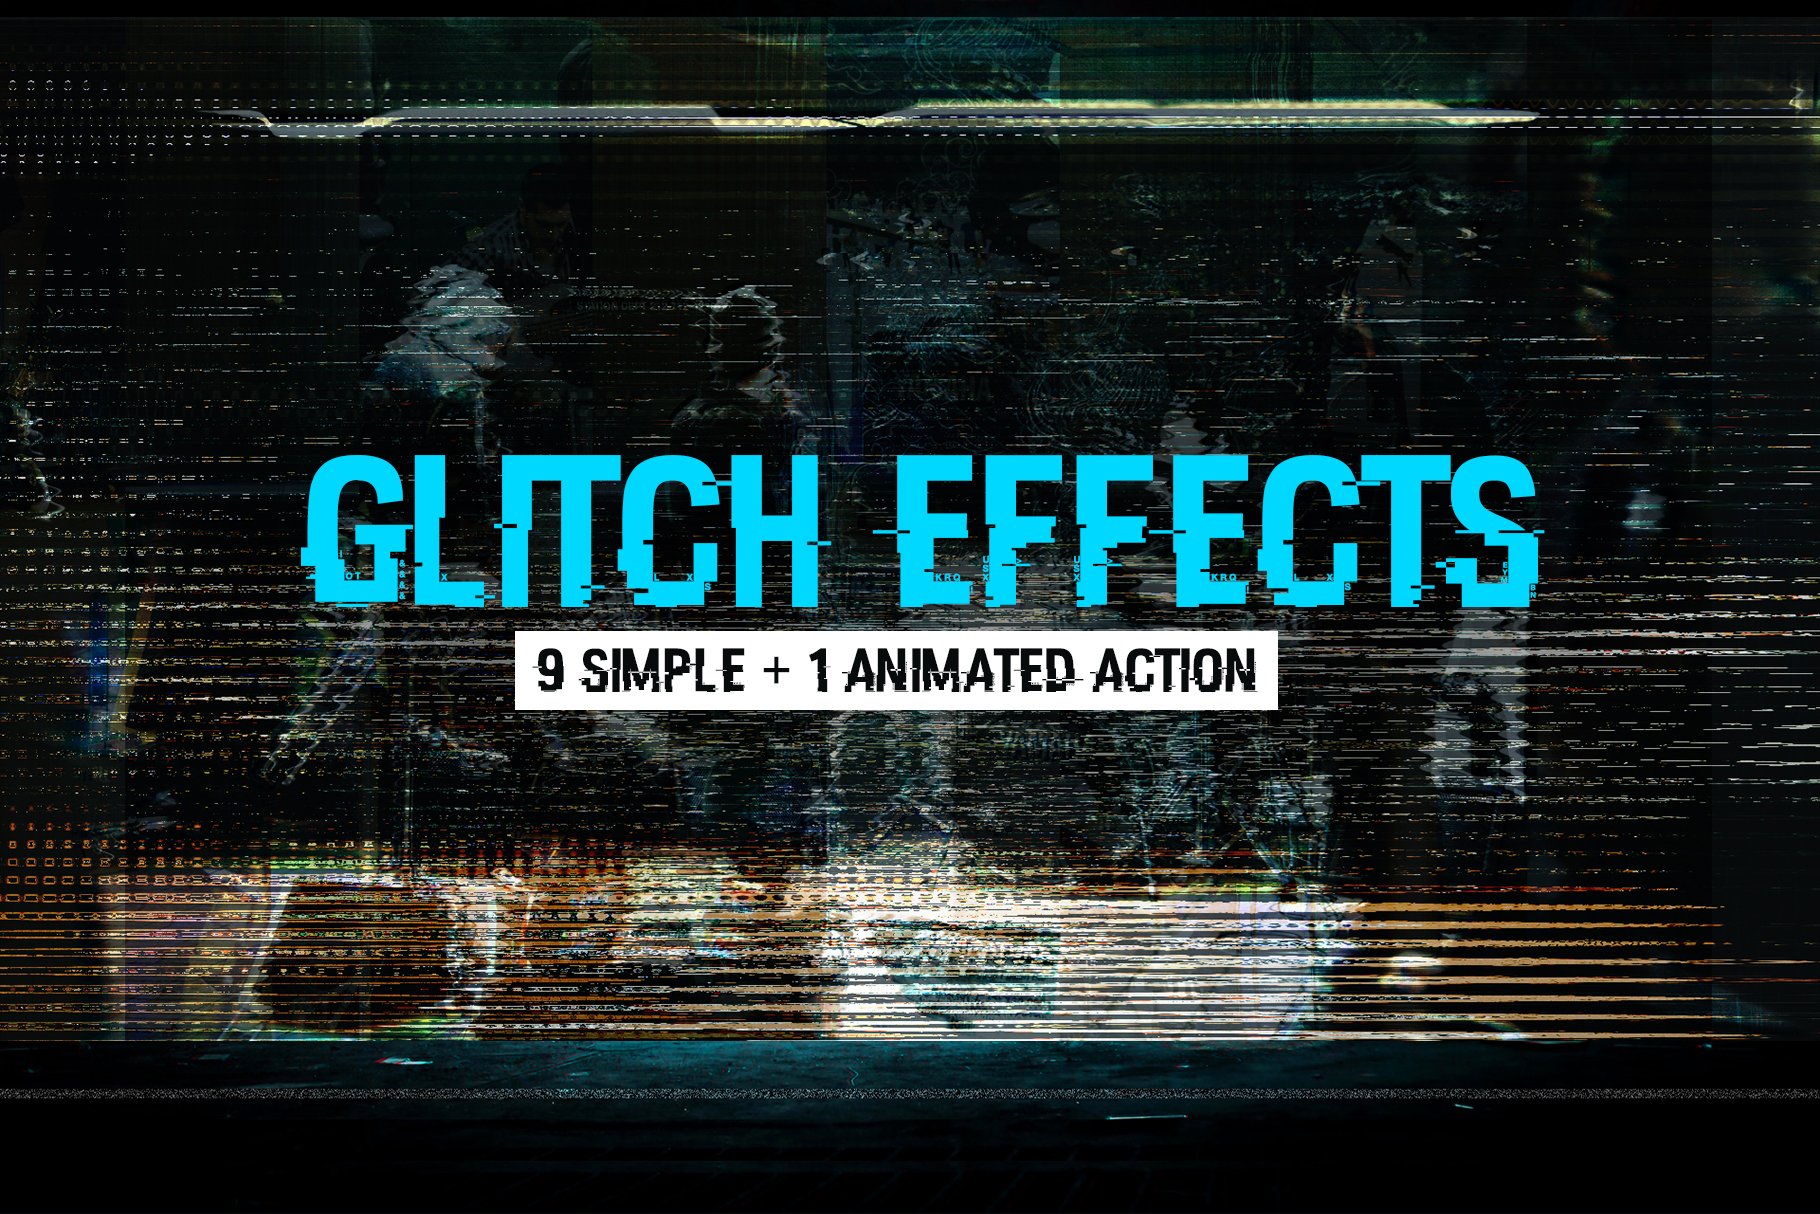 Glitch Effects Mega Packcover image.